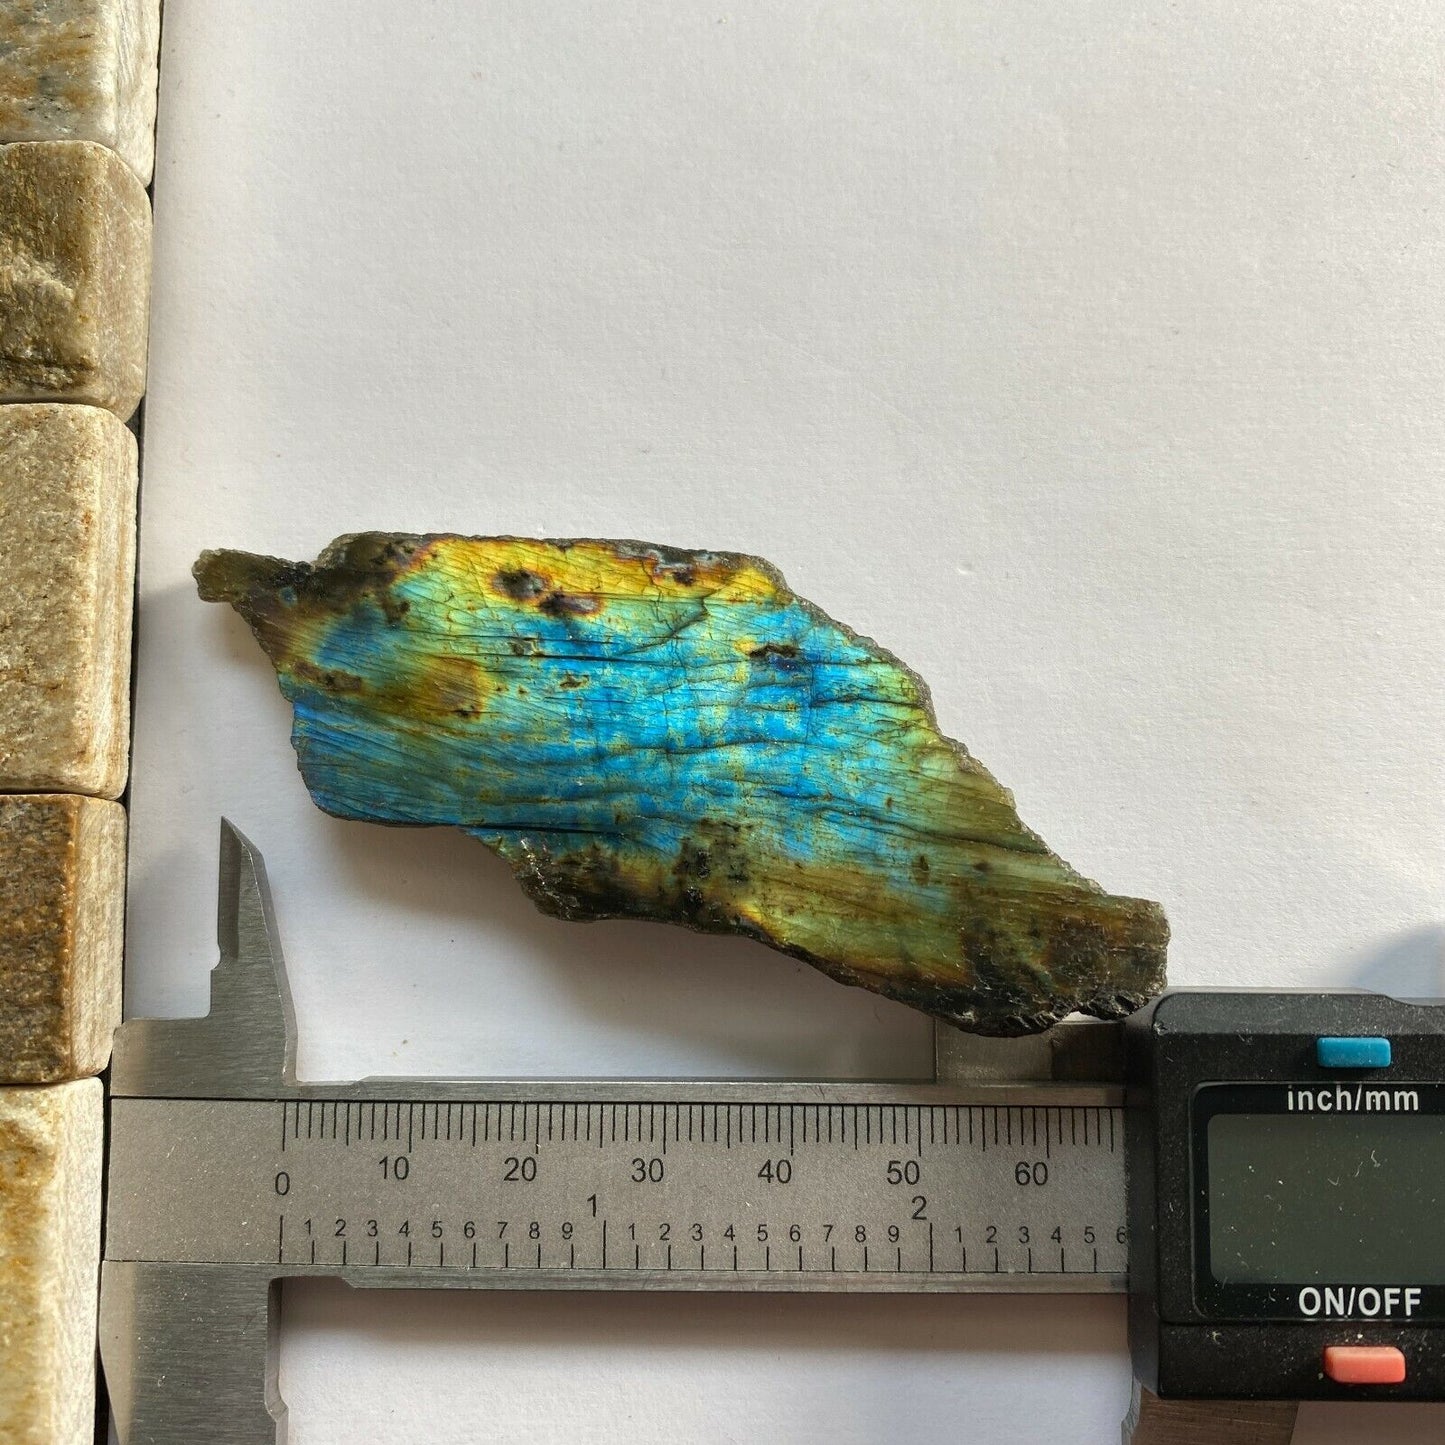 LABRADORITE  UNTREATED ROUGH SPECIMEN WITH ONE POLISHED FACE 33g  MF8398